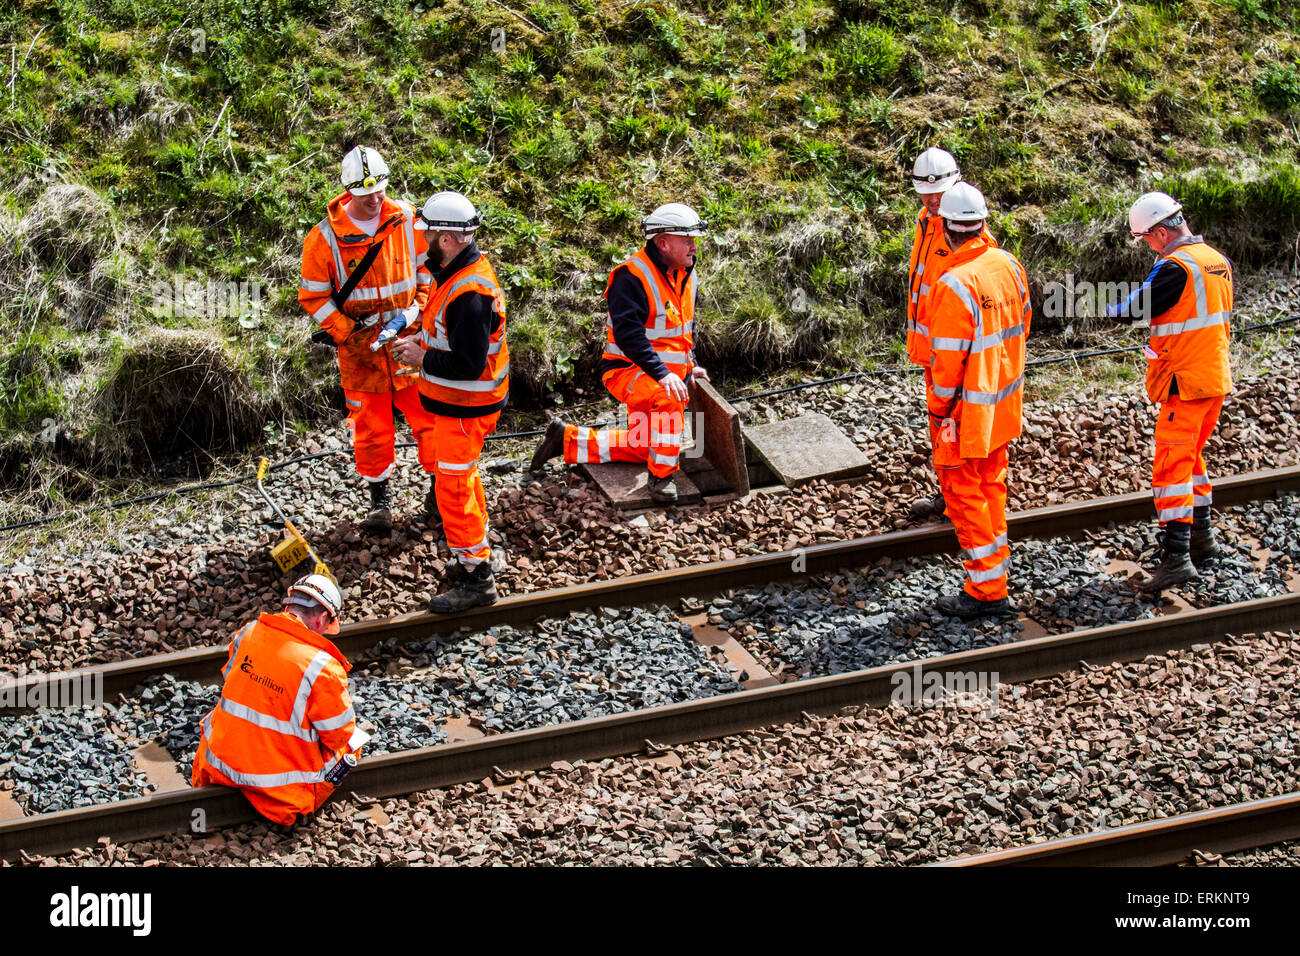 Tebay, Cumbria, UK 4th June, 2015. Health and Safety for Men at Work. Network Rail Engineers on Settle Carlisle Line, working on rail track maintenance. Inspectors, rail engineer. Safety engineers, employees, rail workers, workmen, renewing railway lines and Infrastructure surveyors inspecting & measuring the transport freight line track at the summit of Ais Gill. The railway's summit at 1,169 feet (356 metres) is north of Garsdale is the highest mainline in England,  and carries heavily loaded main line freight trains. Stock Photo